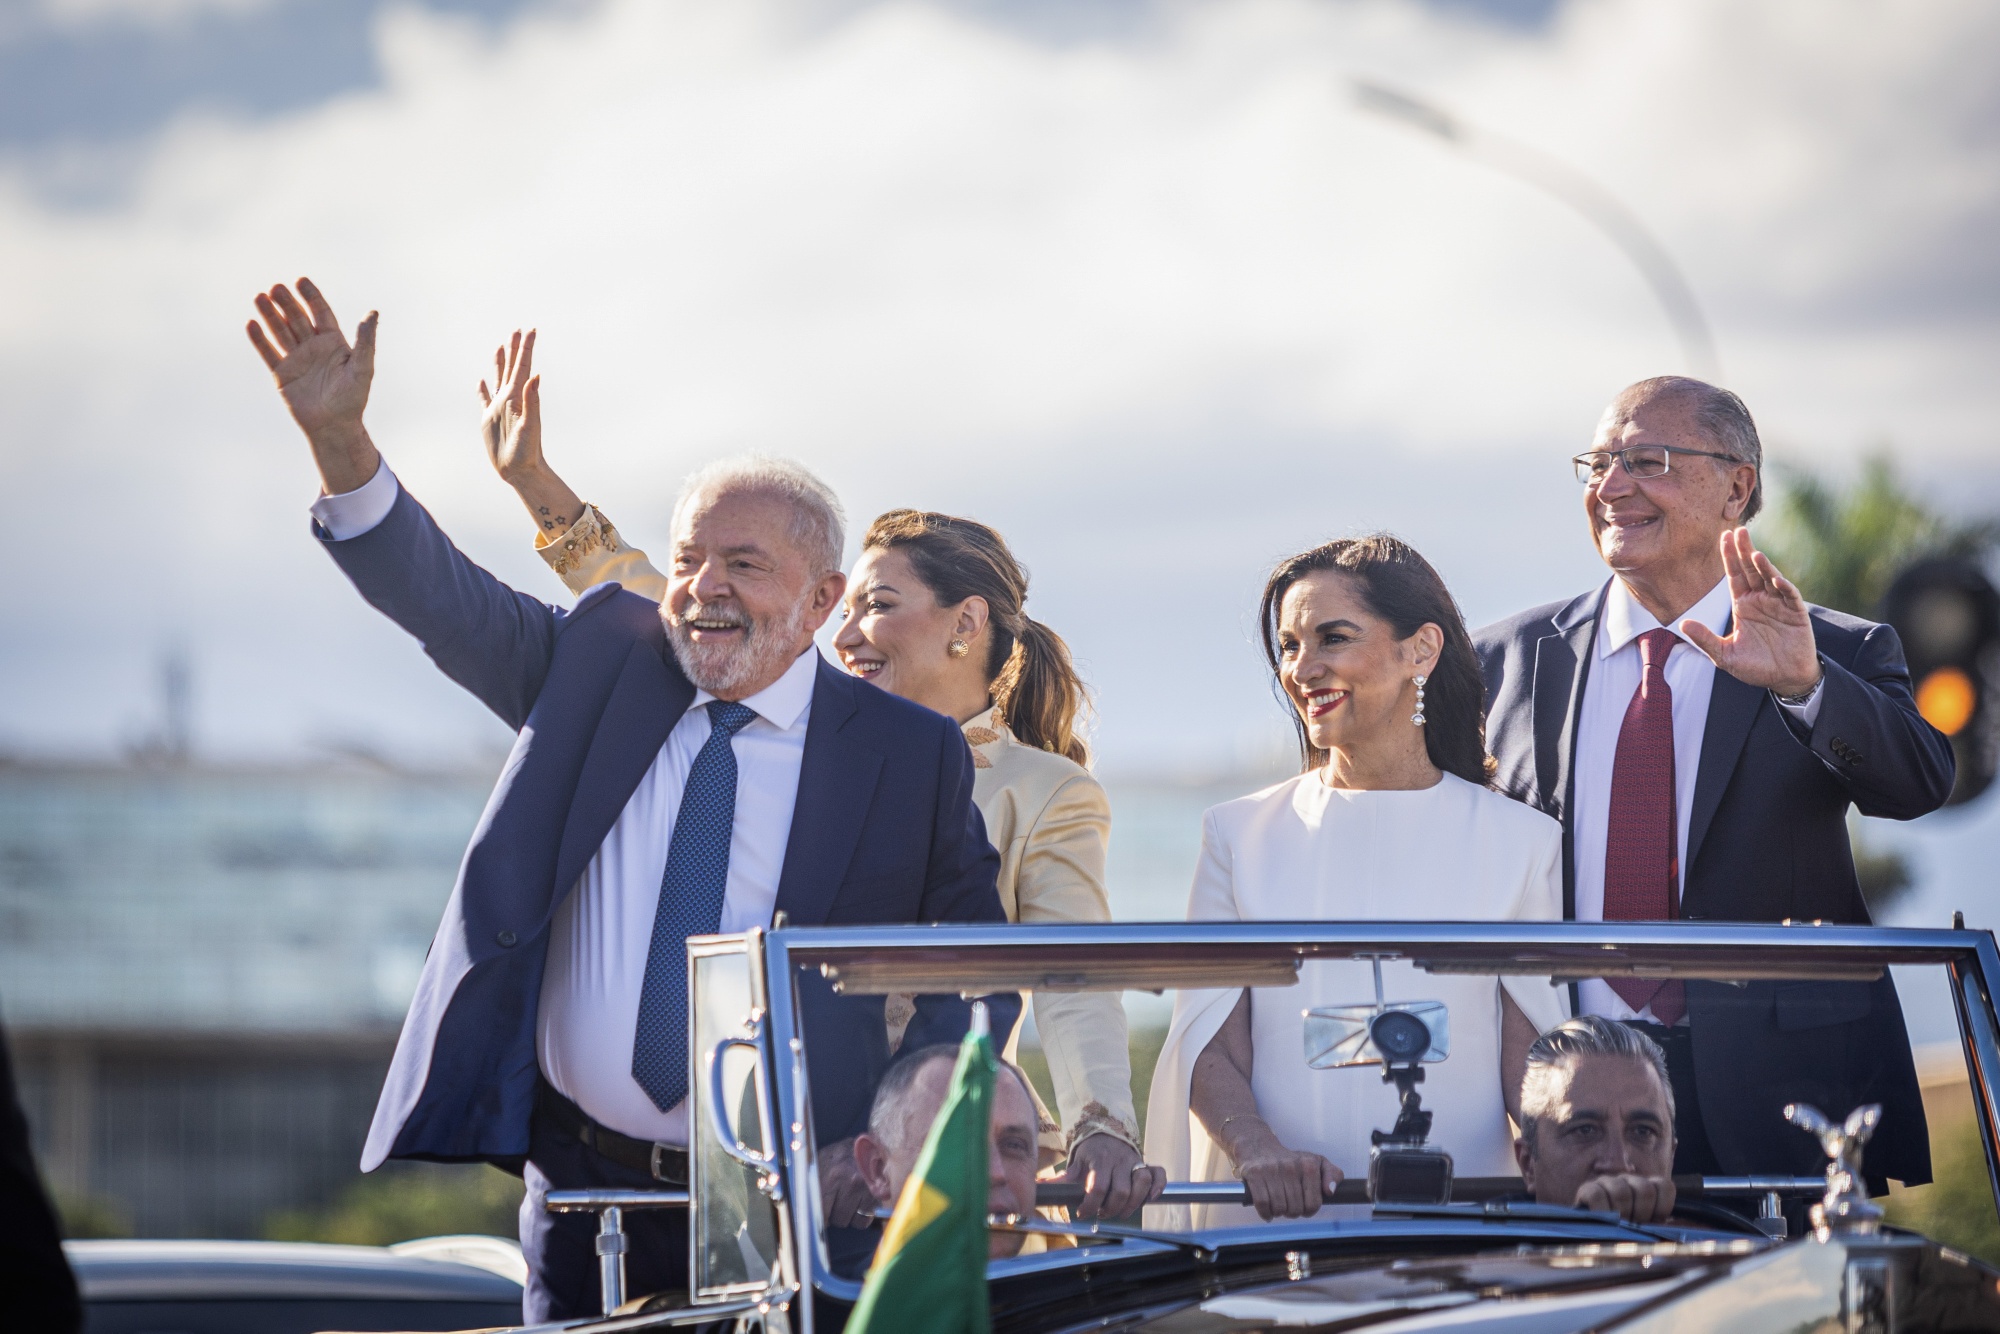 After a victory for democracy, what is Brazil's road ahead?